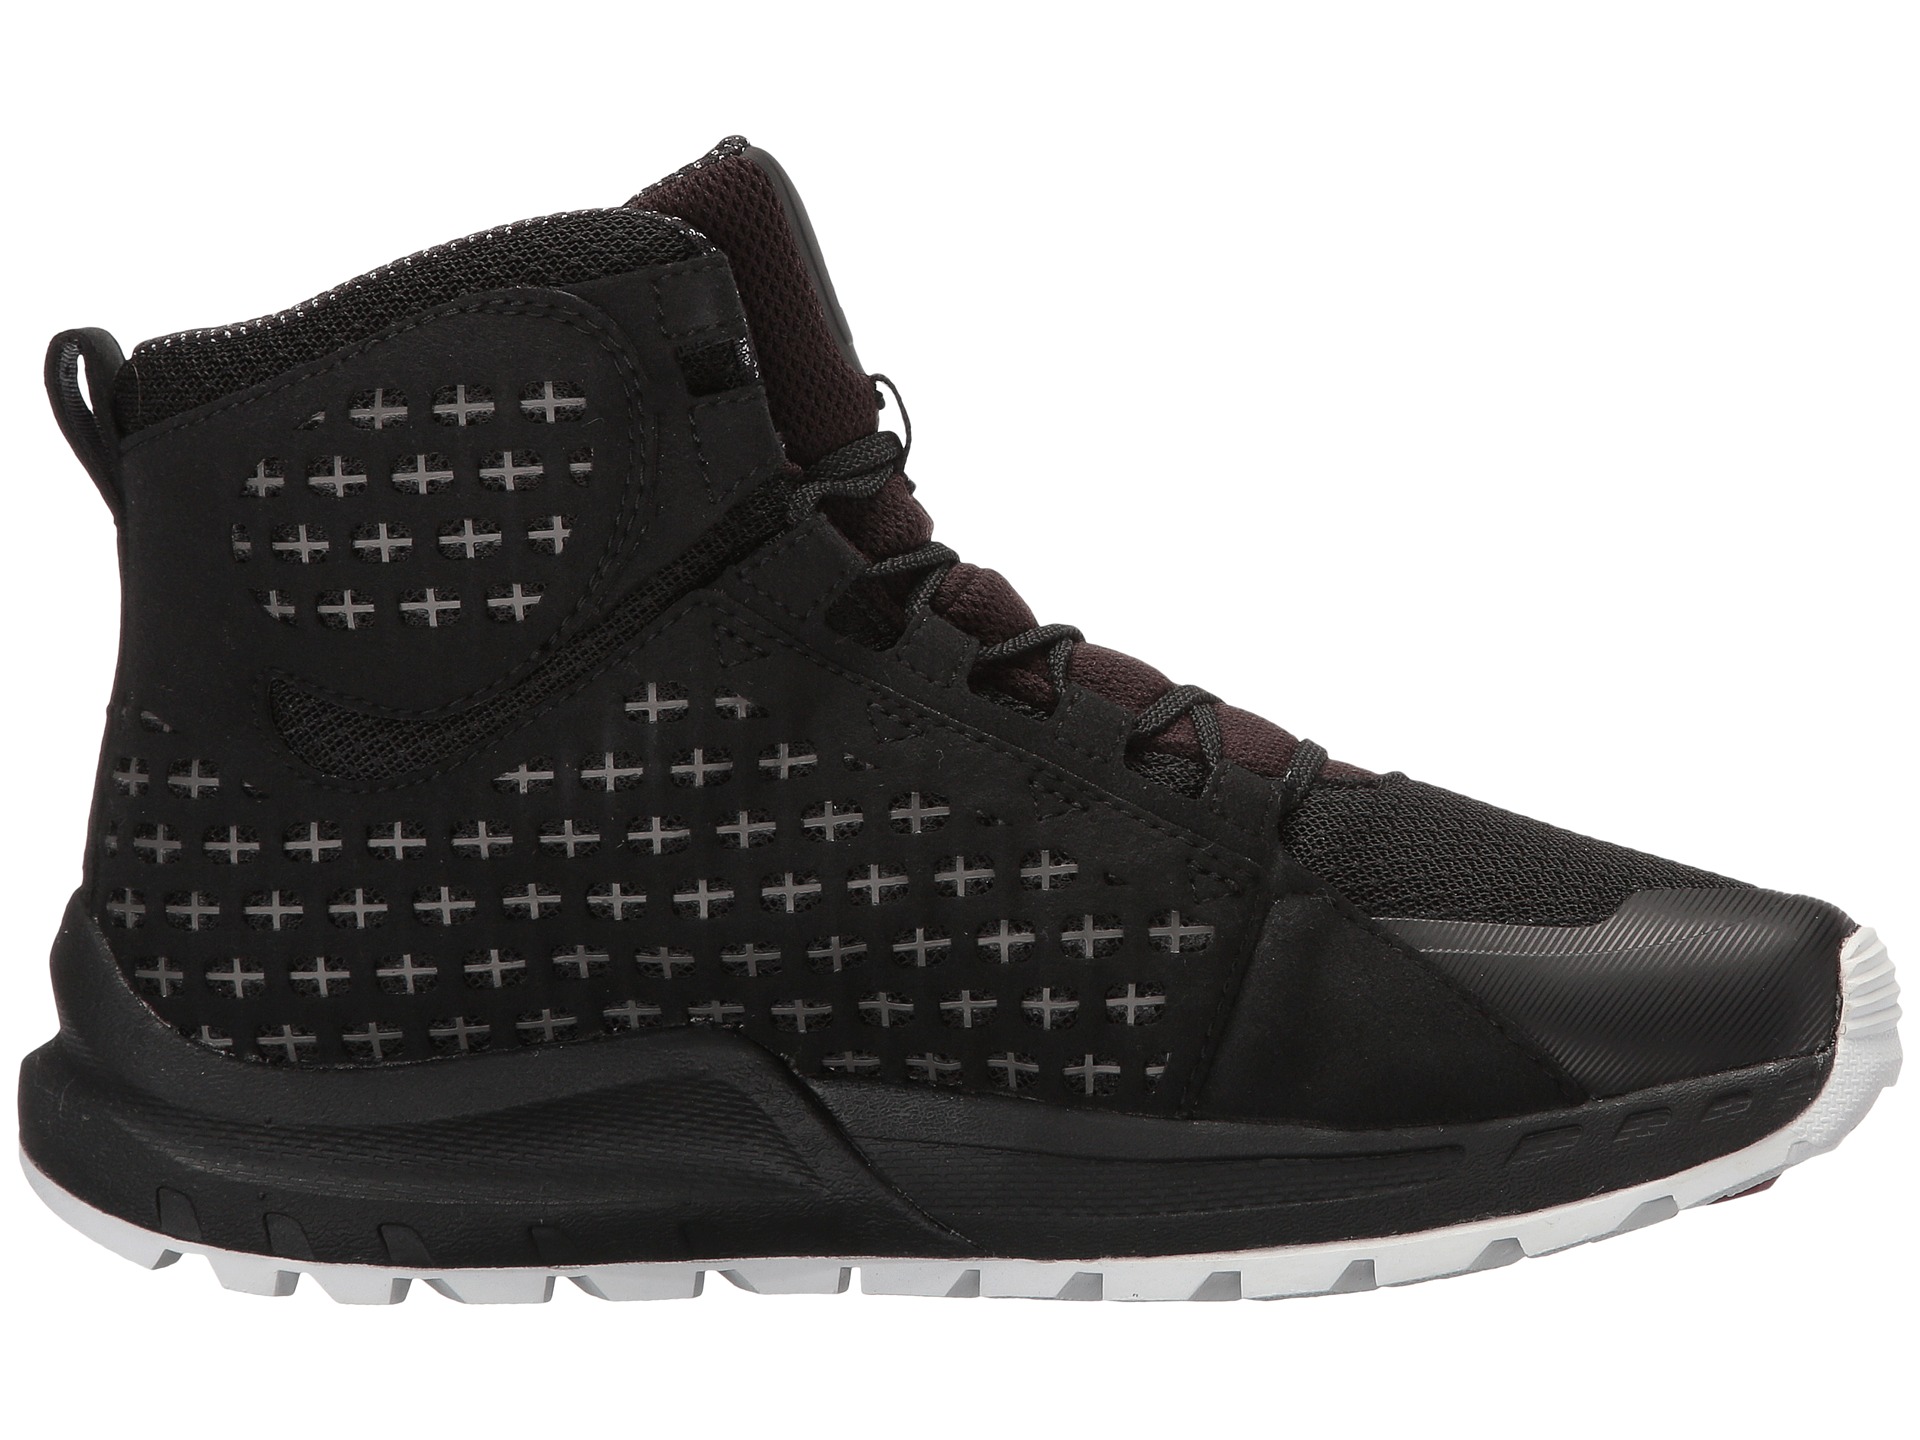 The North Face Mountain Sneaker Mid WP at Zappos.com